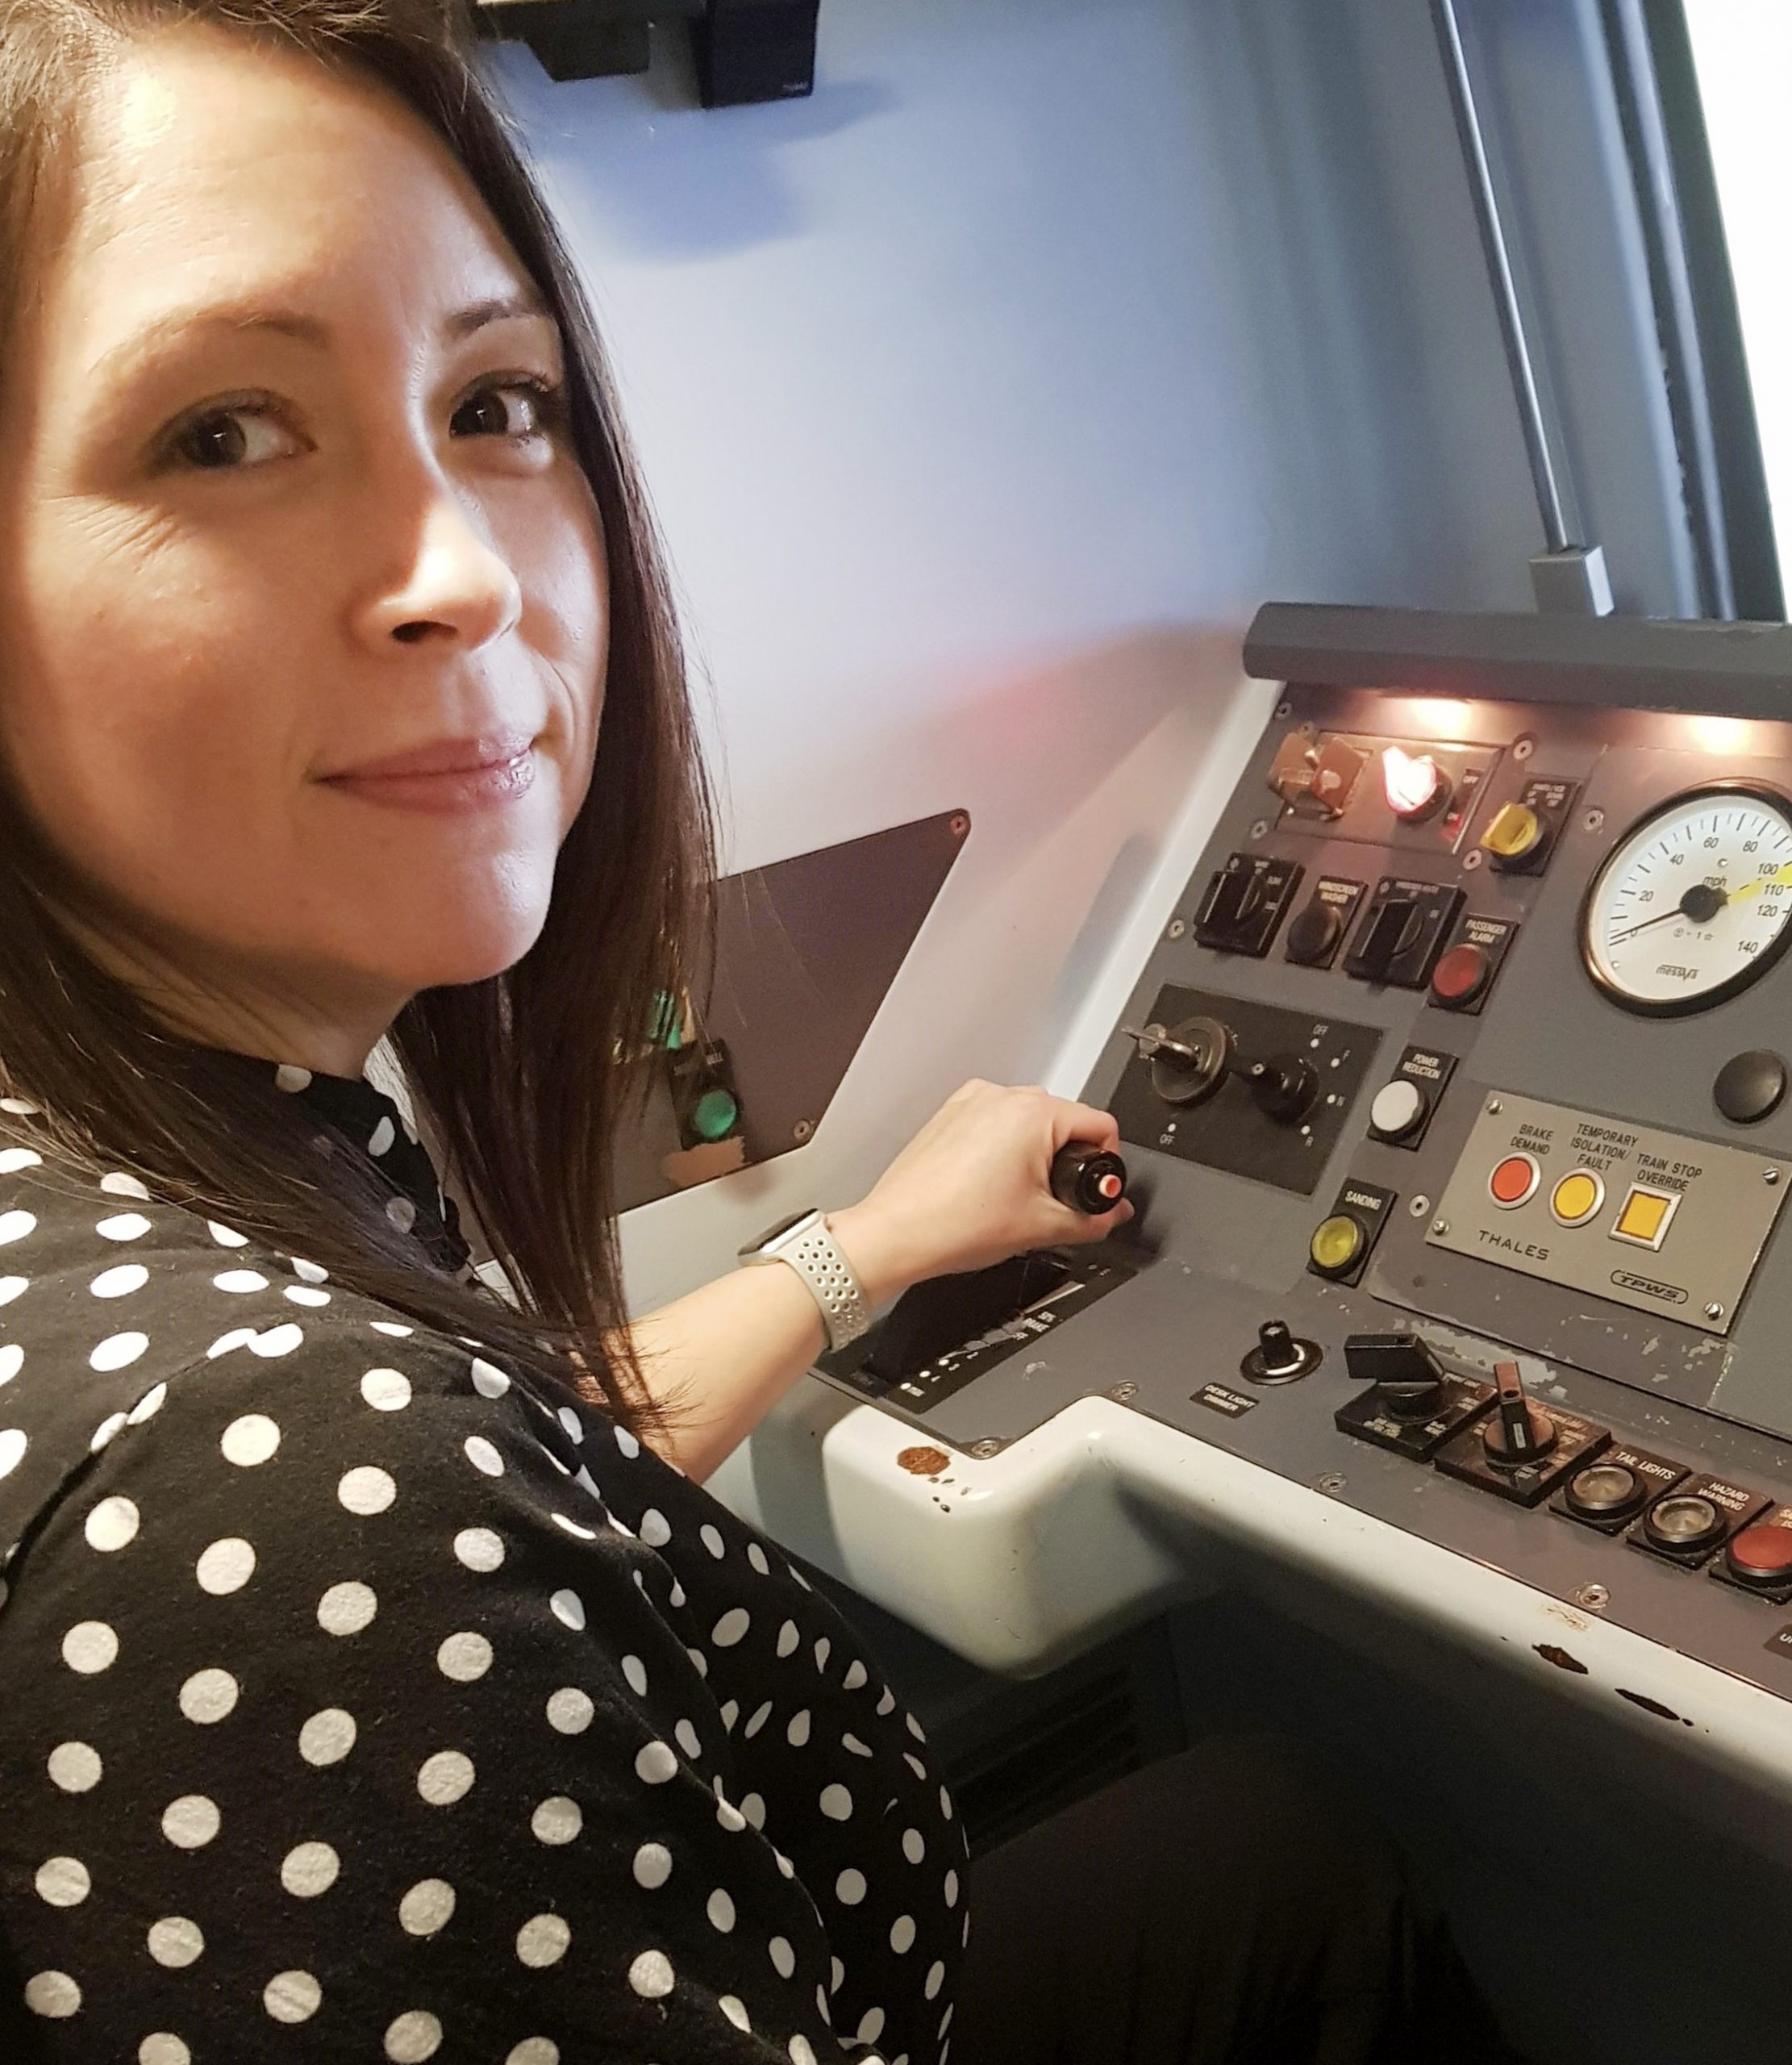 NEWS | West Midlands Trains calls for greater train driver diversity as it launches latest recruitment drive